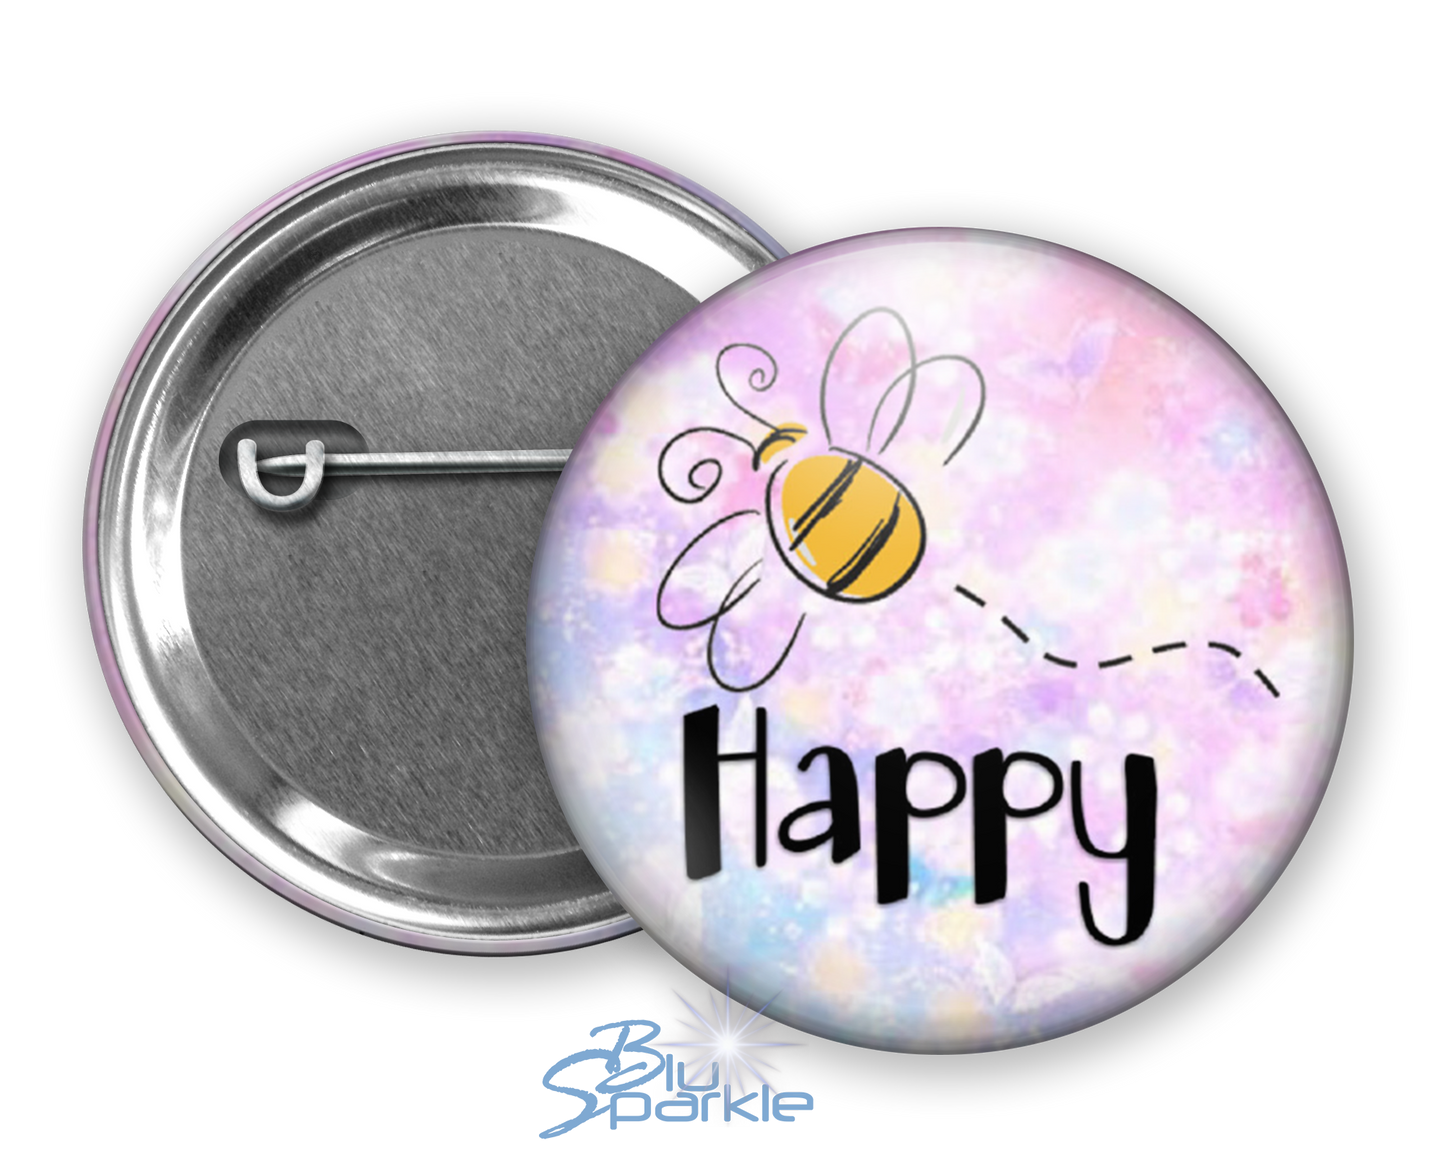 Bee Happy - Pinback Buttons